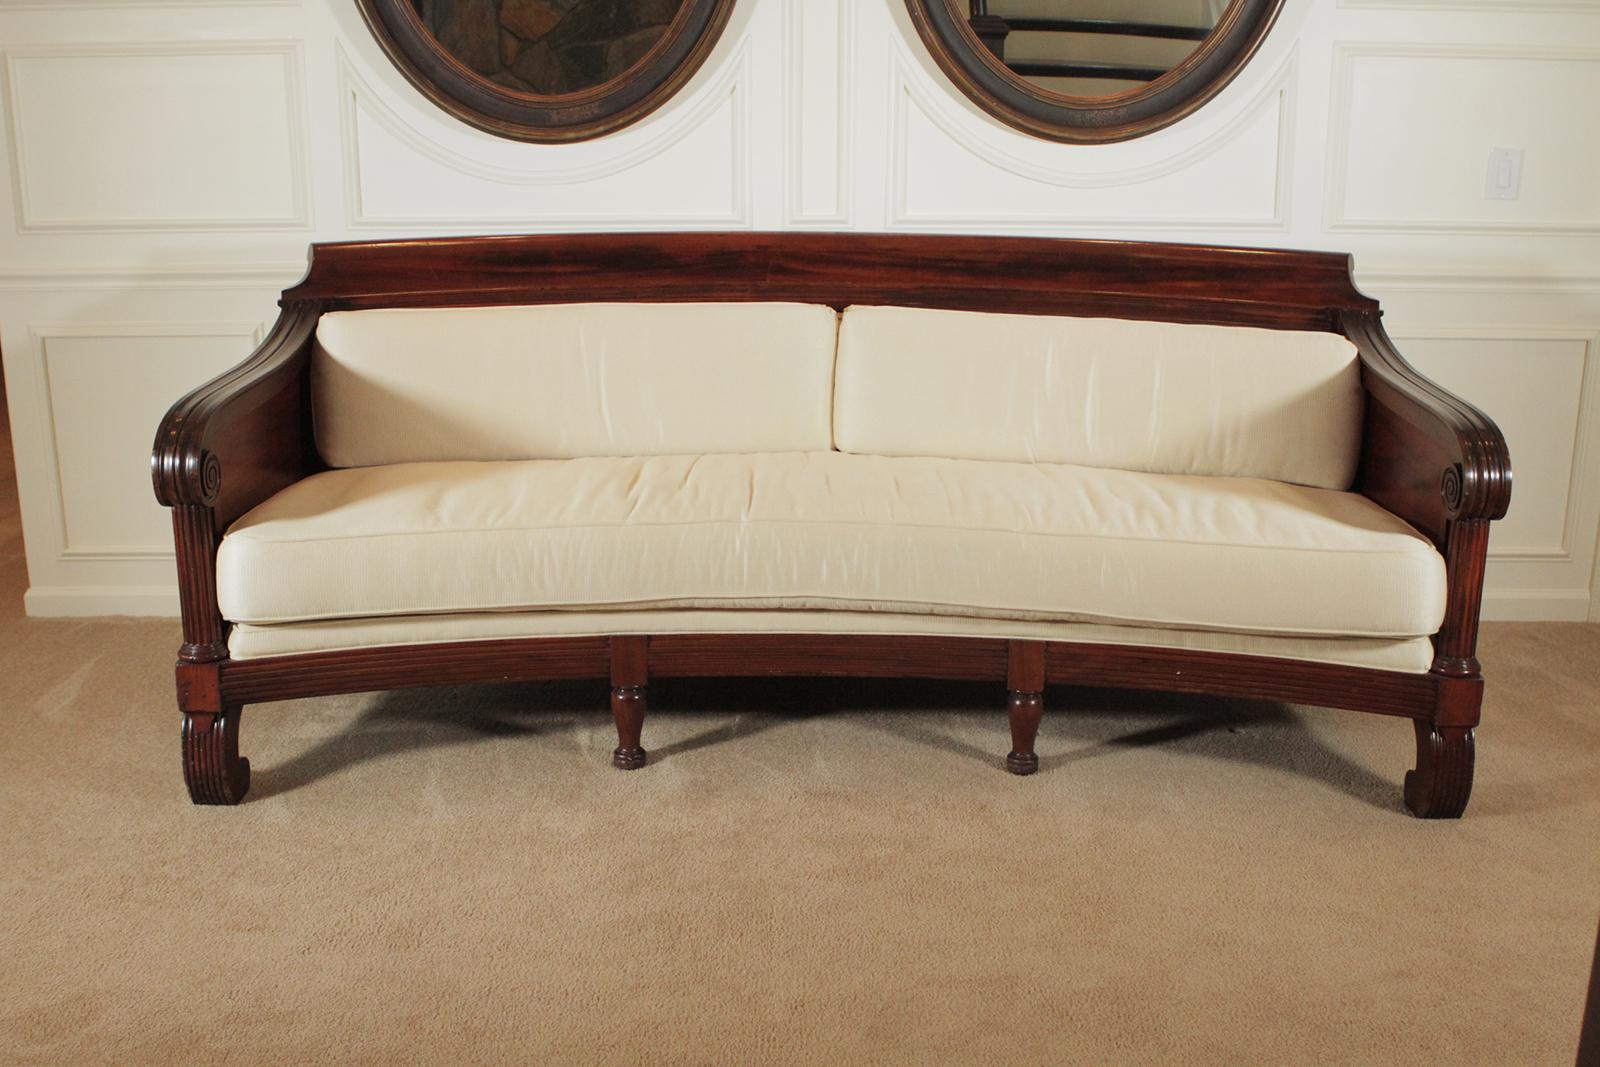 Mahogany Regency style sofa. The gorgeous hand carved frame with pillow back and seat. The fabric is somewhat worn and will need recovering. A very rare and long 97' inches long and gently curved. Dimensions: 97 W x 40 D x 39 H.